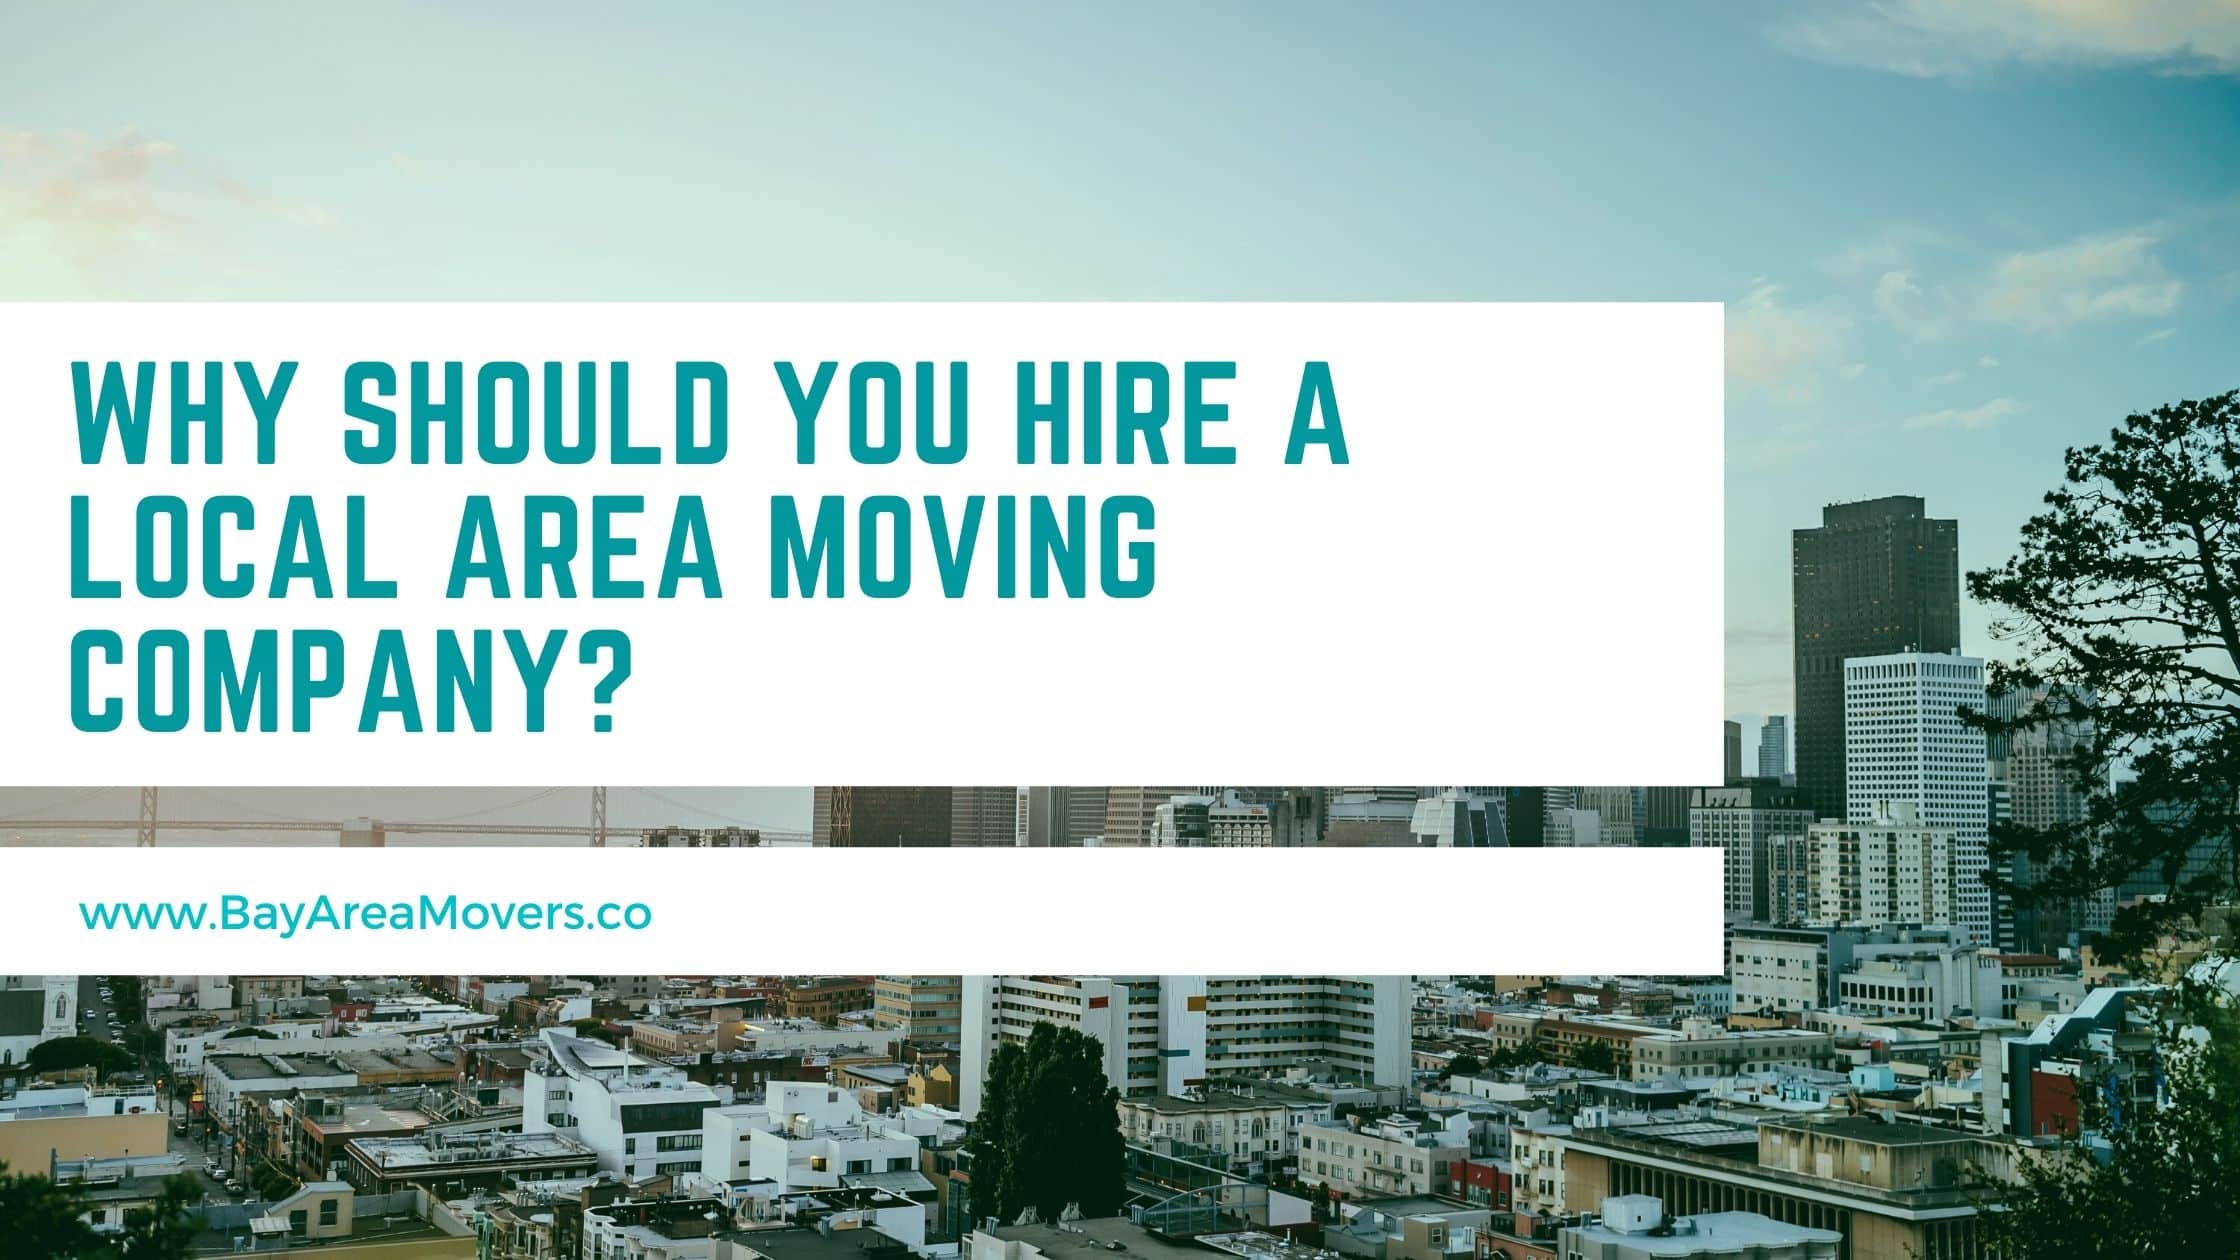 Why should You hire a Local Area Moving Company?